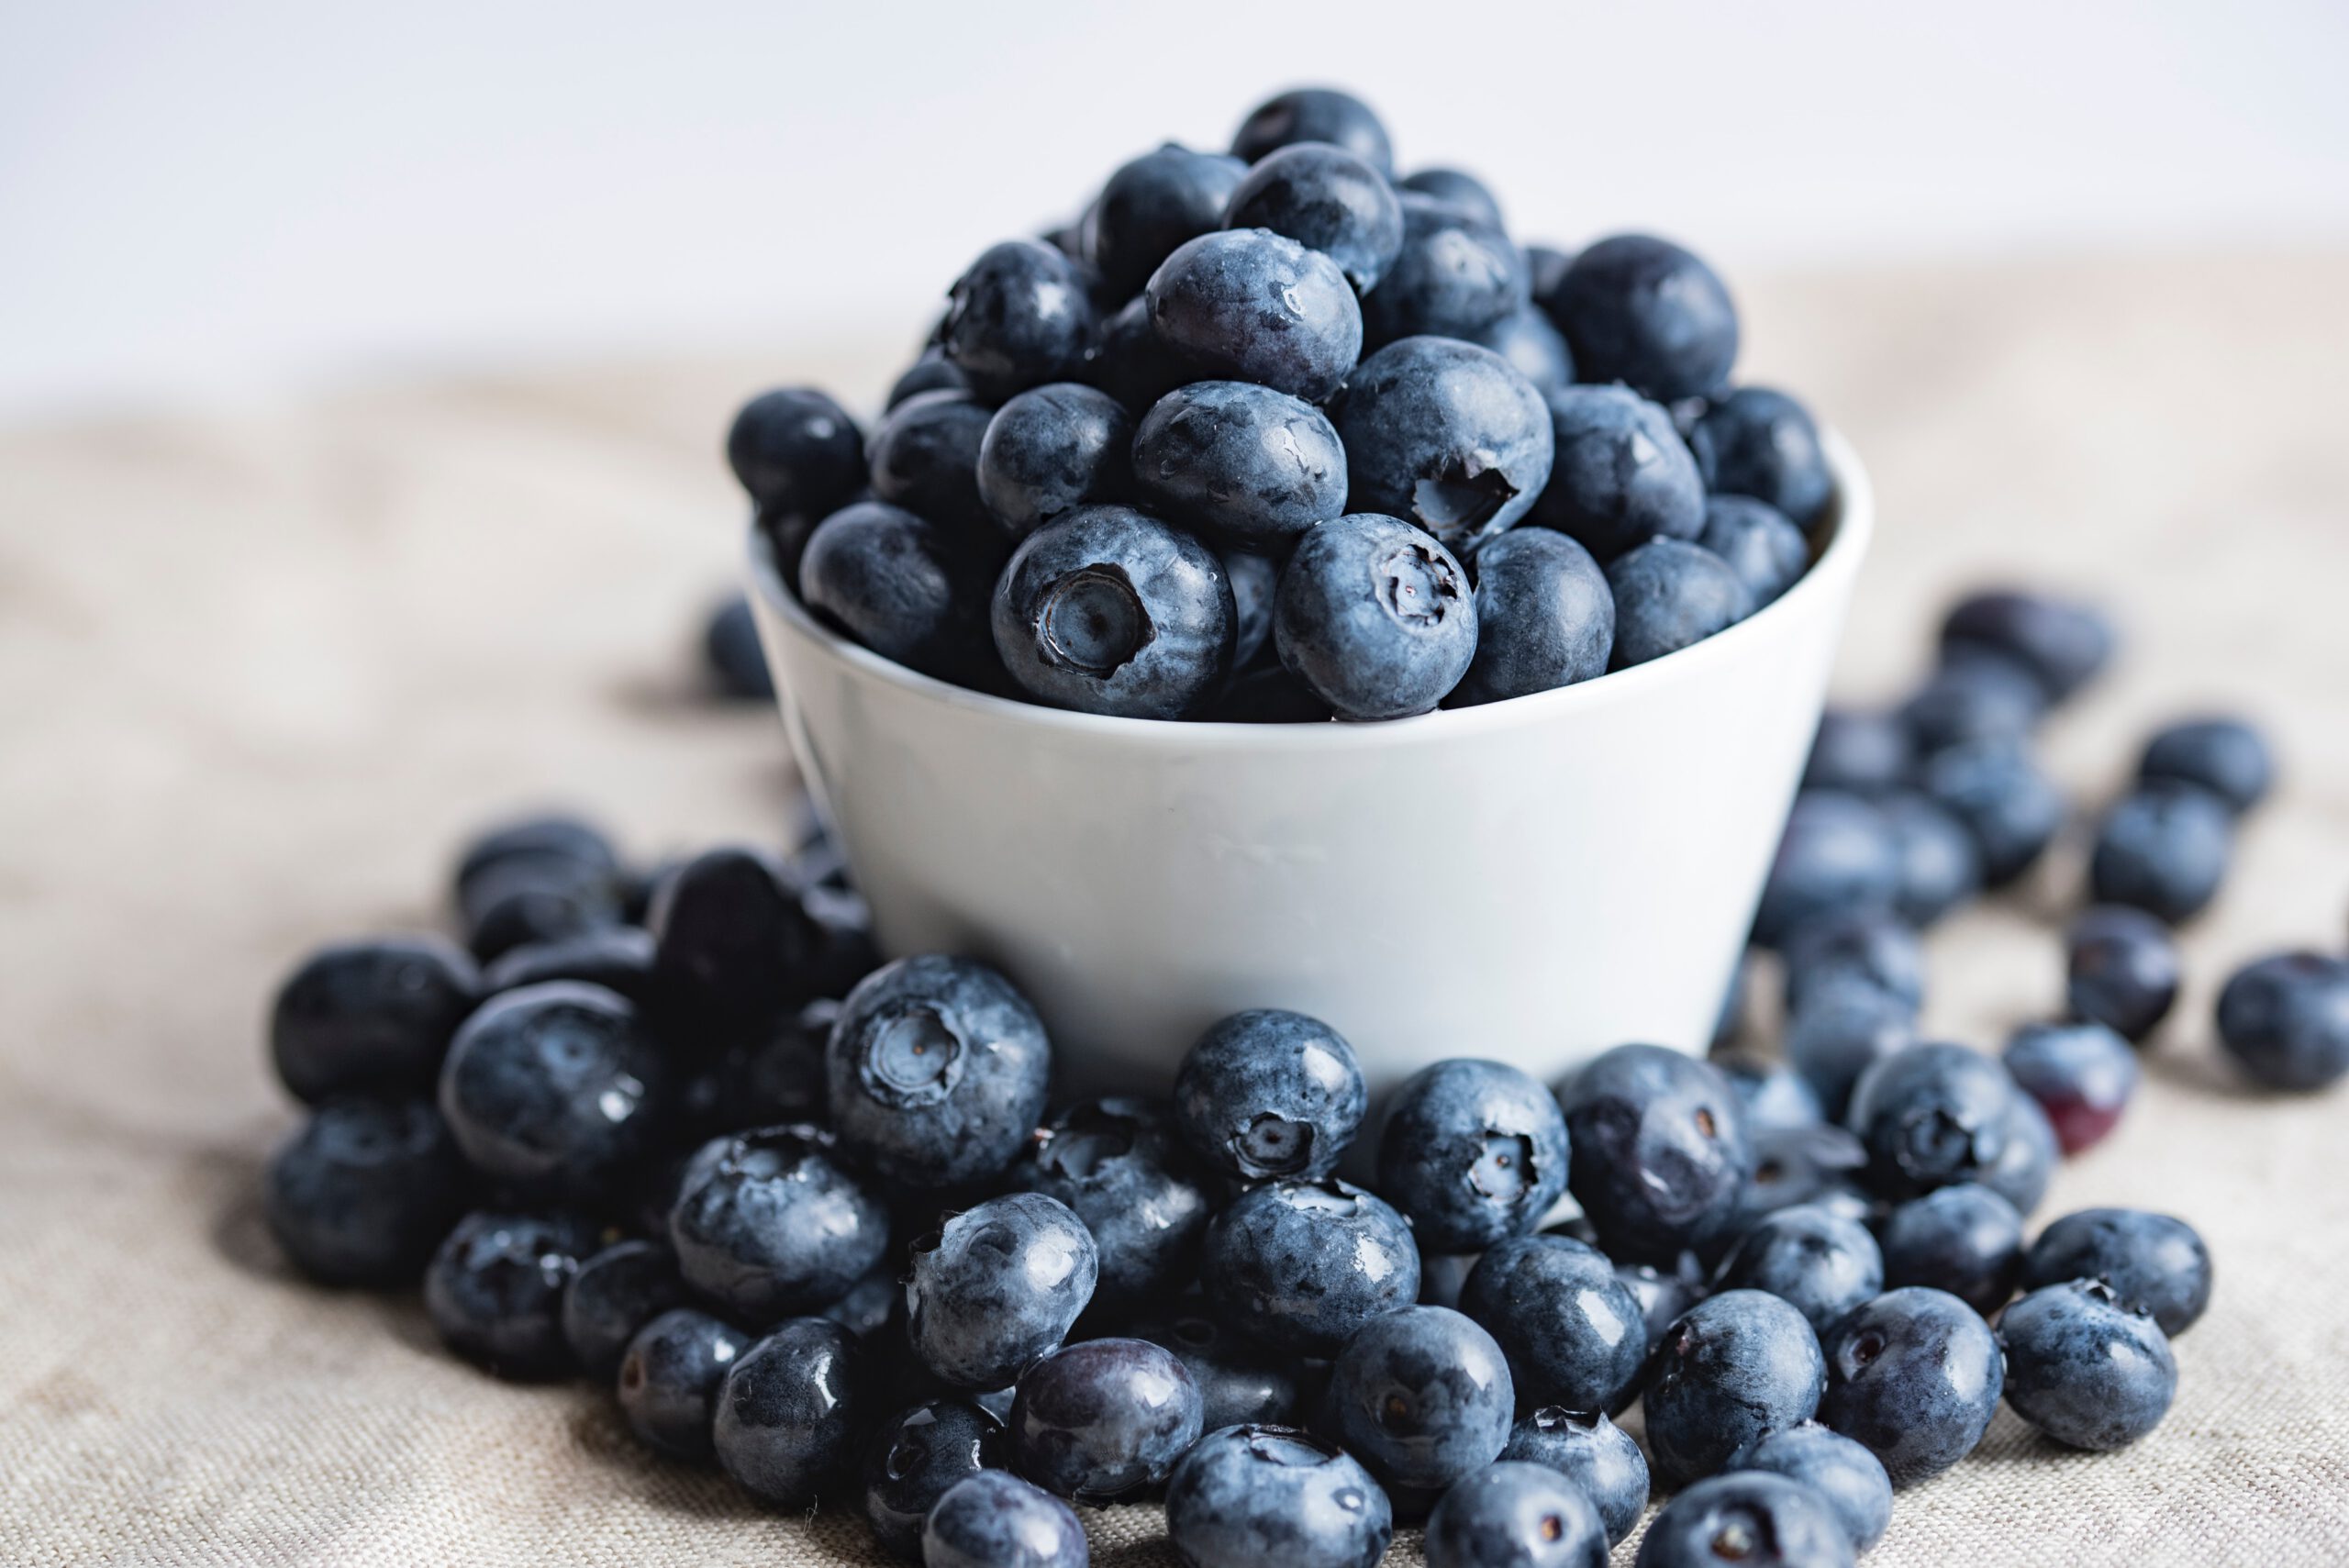 Are Bluberries Good For Concnetration?